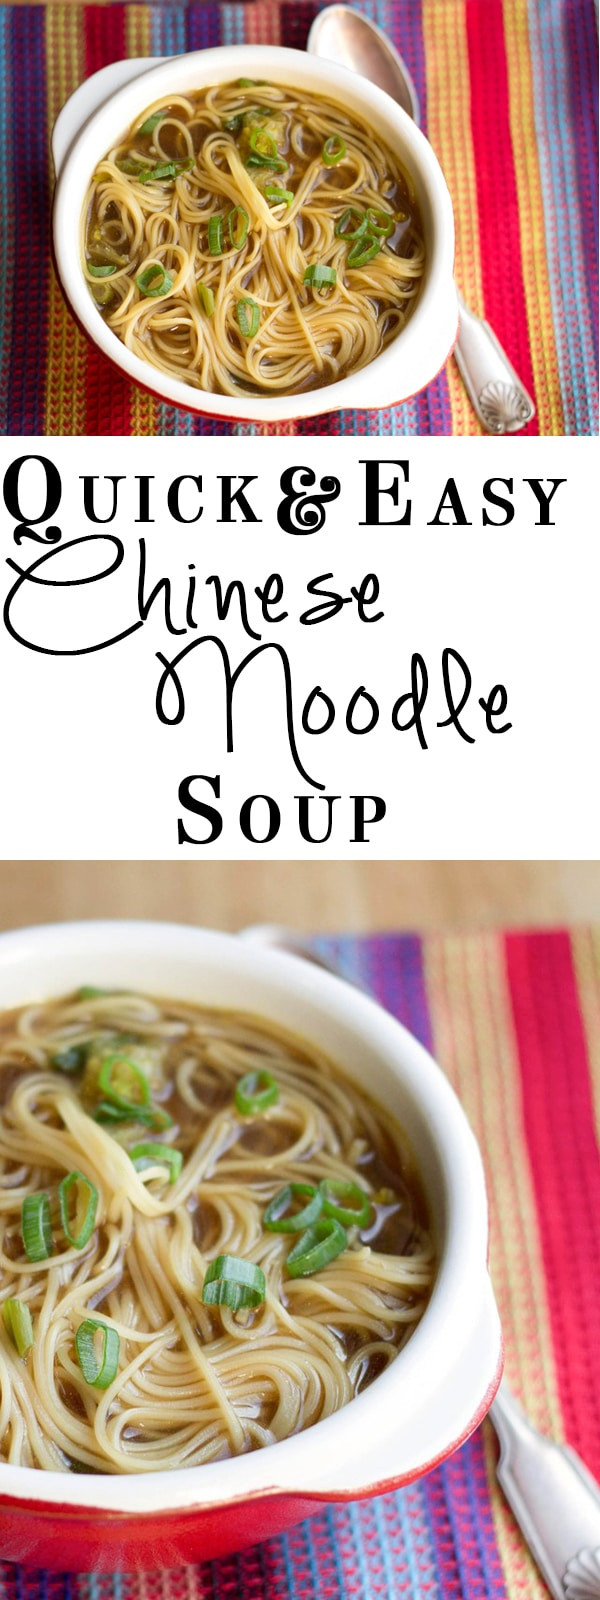 Easy Chinese Noodle Recipes
 Quick & Easy Chinese Noodle Soup Erren s Kitchen